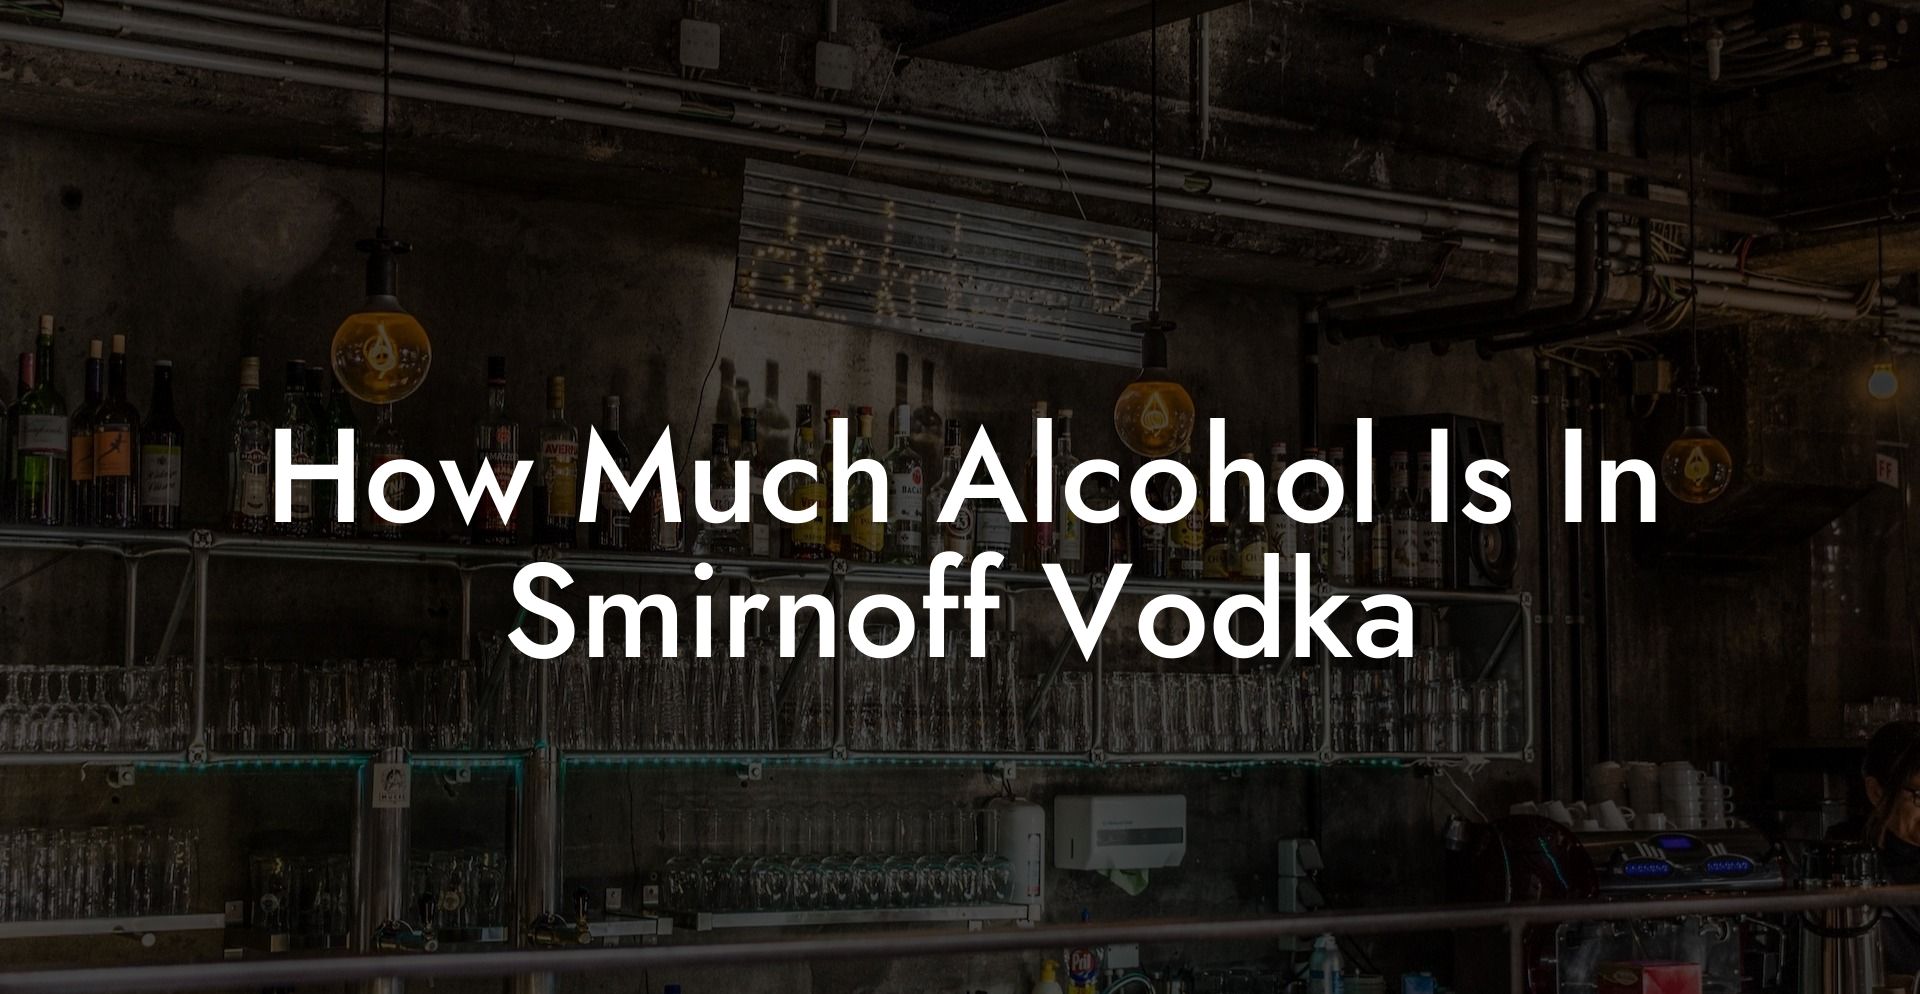 How Much Alcohol Is In Smirnoff Vodka